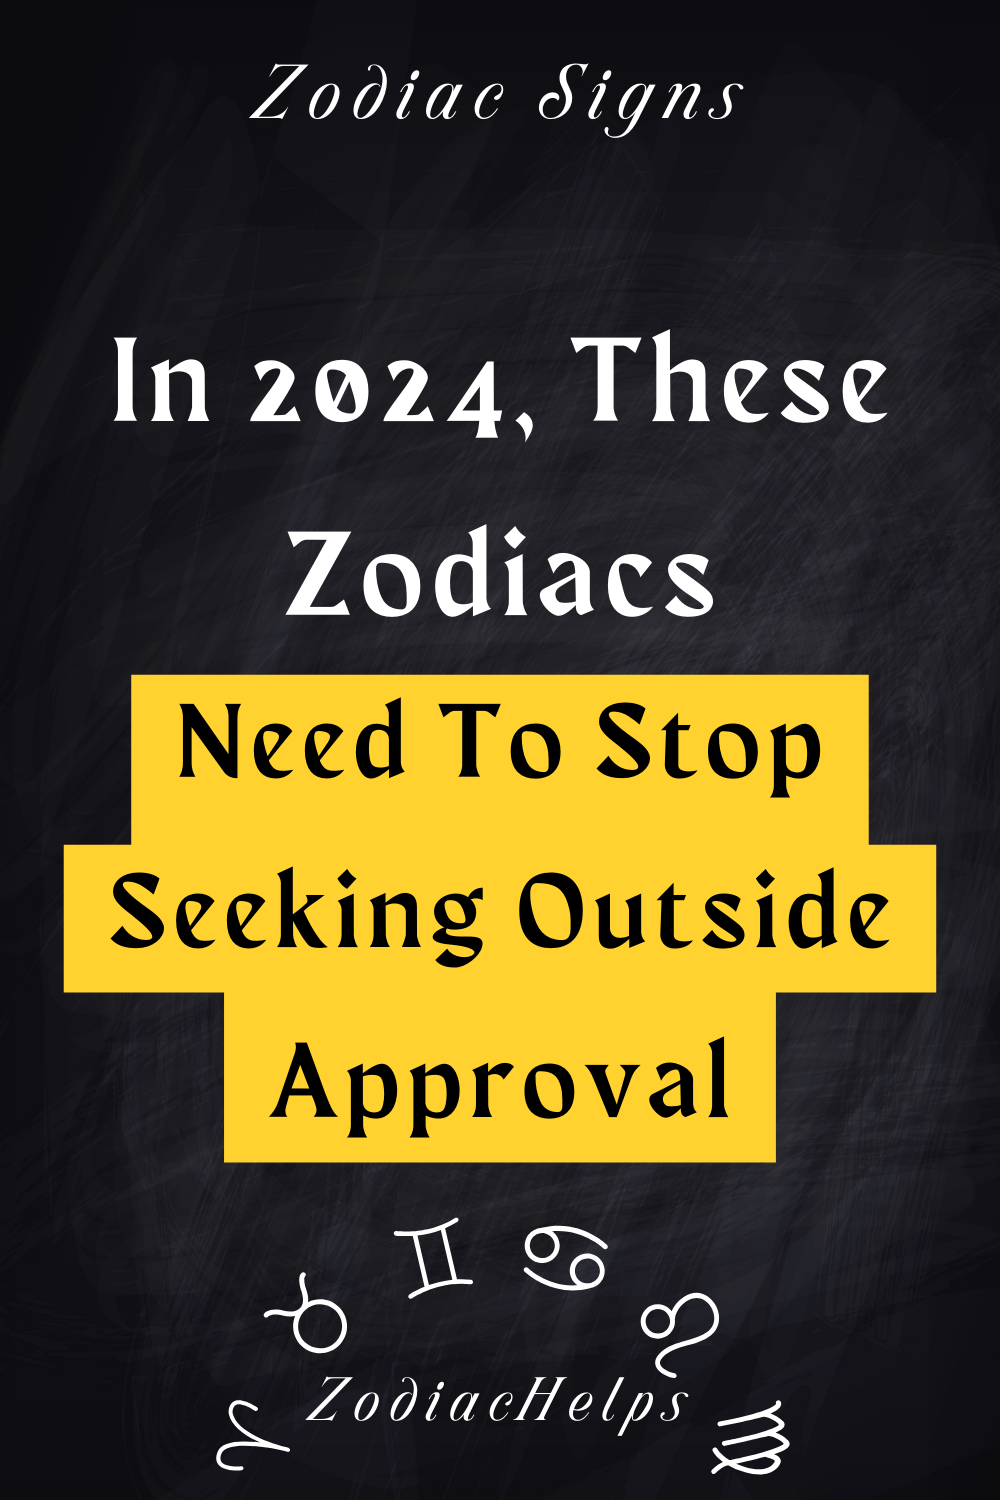 In 2024, These Zodiacs Need To Stop Seeking Outside Approval